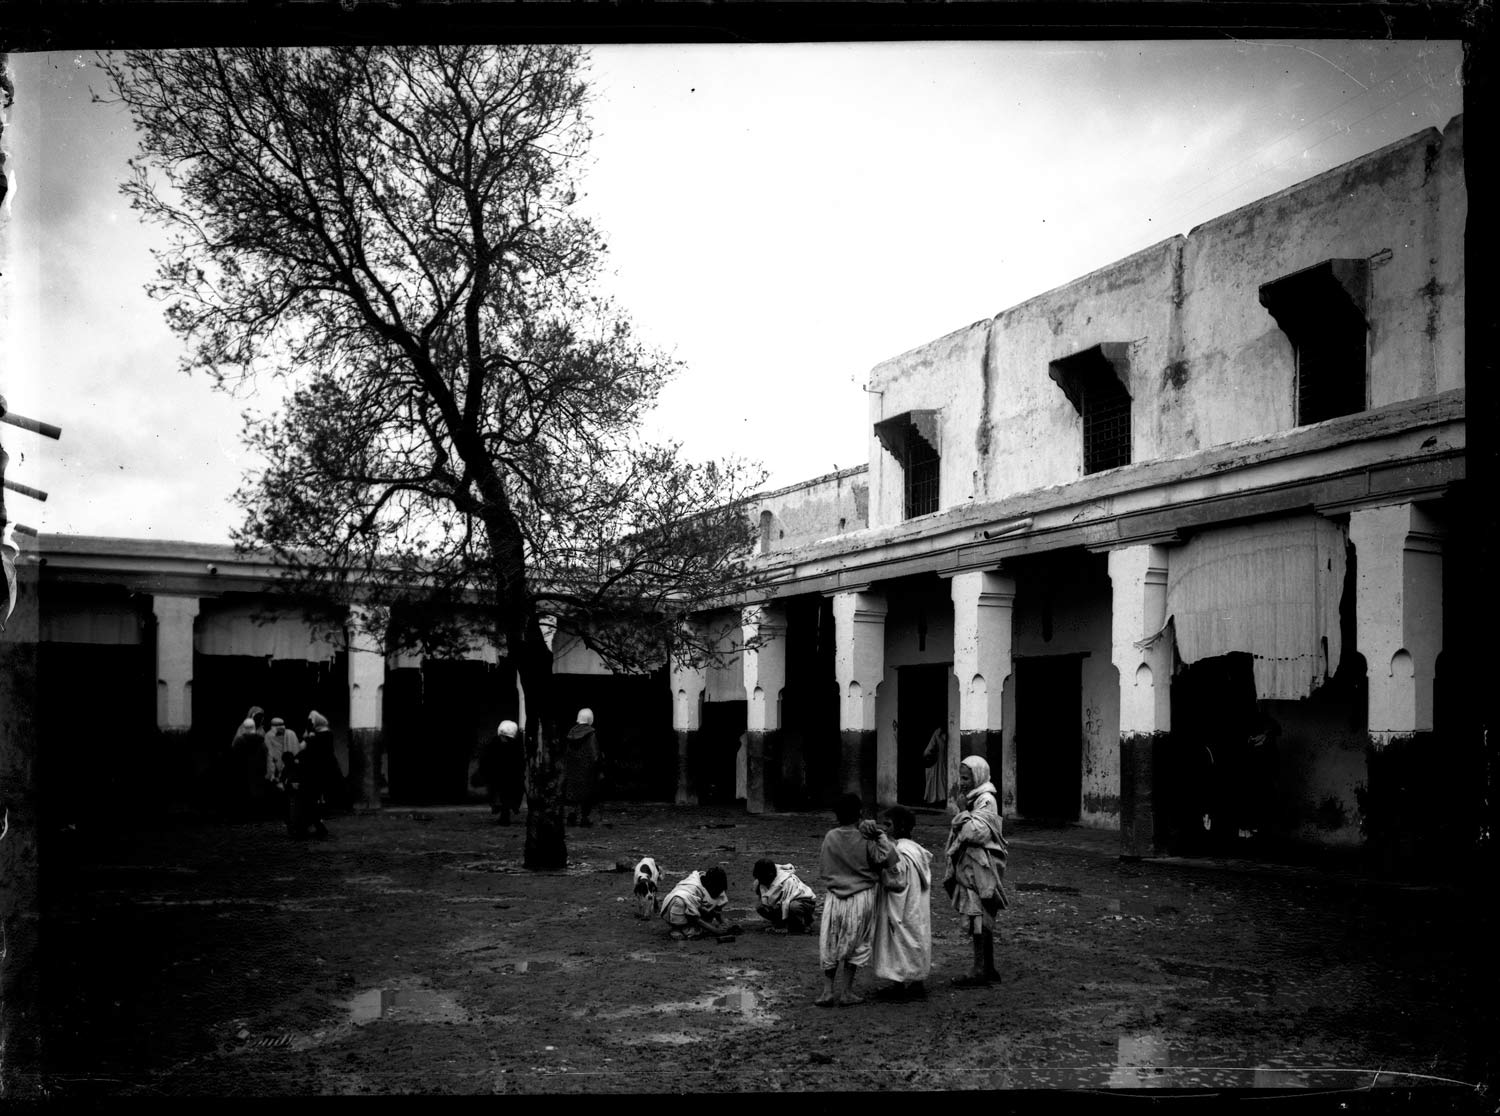 People in traditional dress in a courtyard with tree 